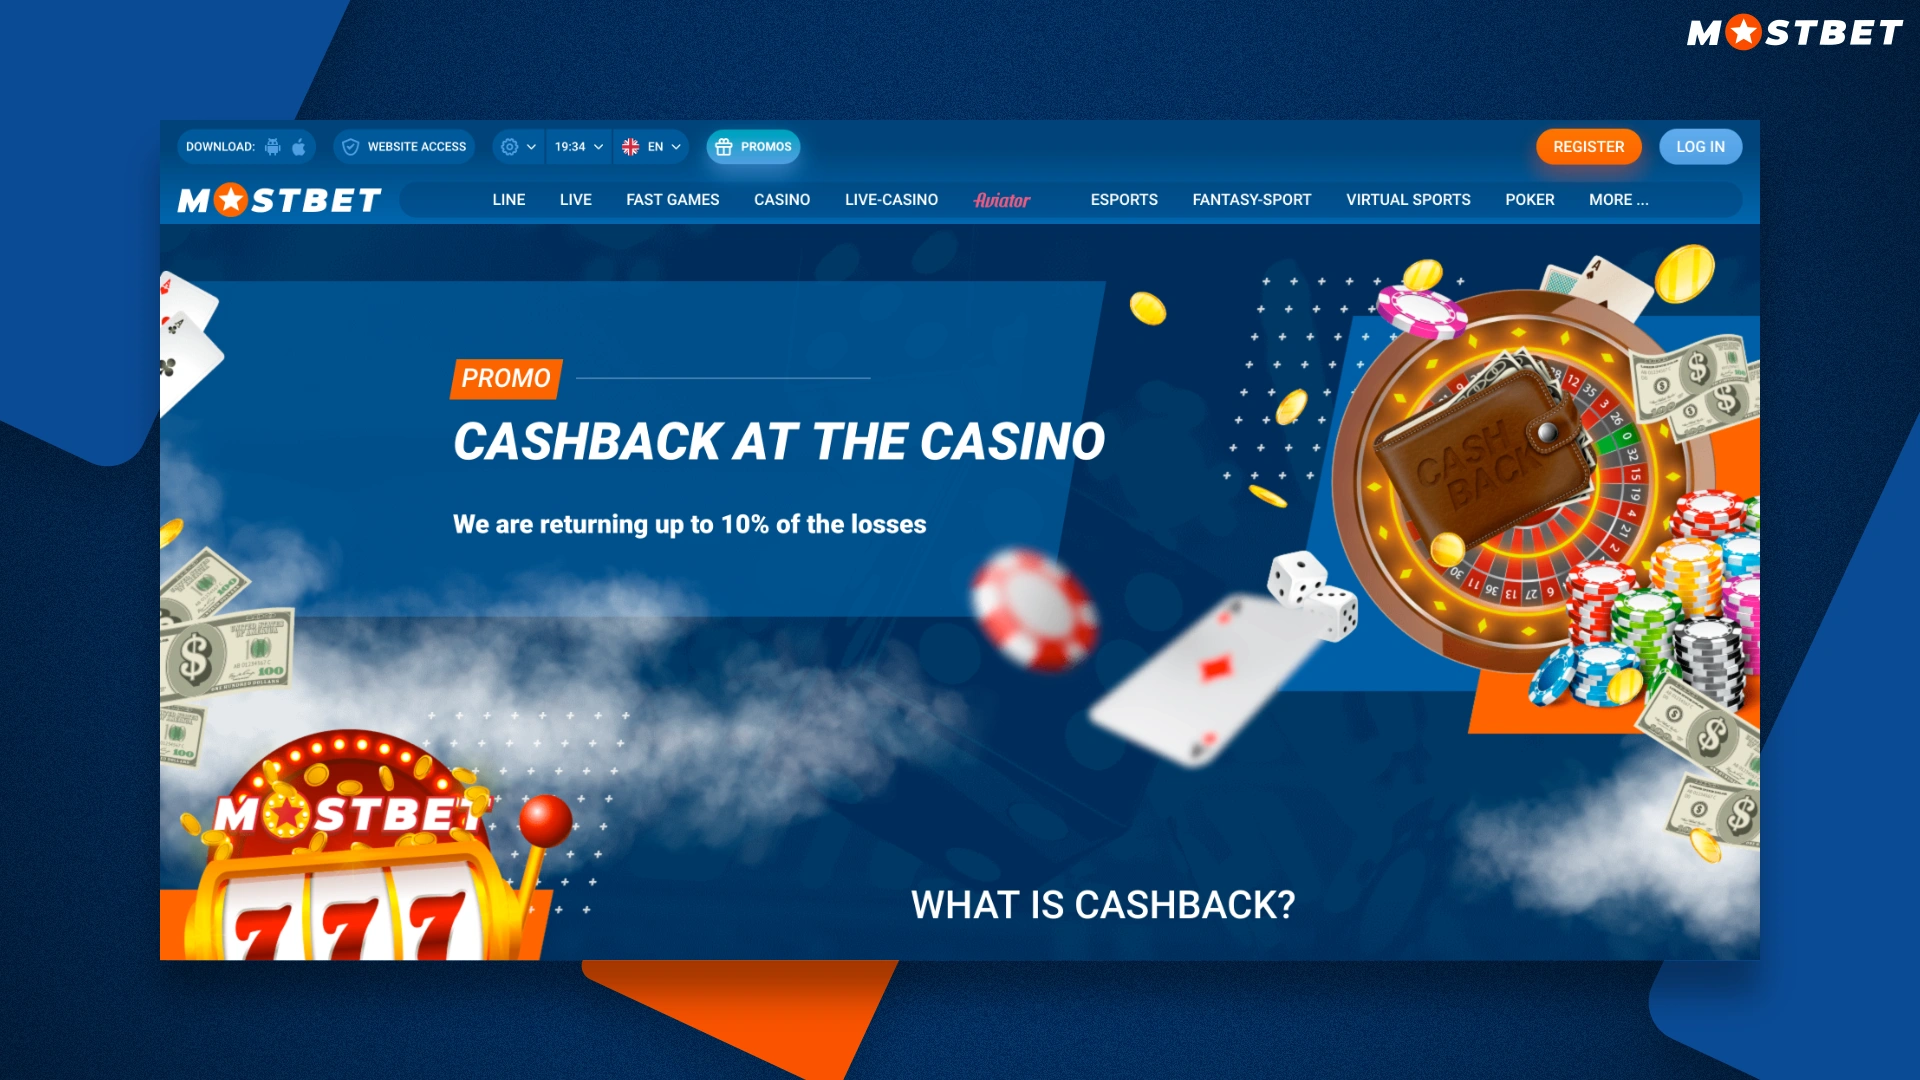 cashback promotion in mostbet casino